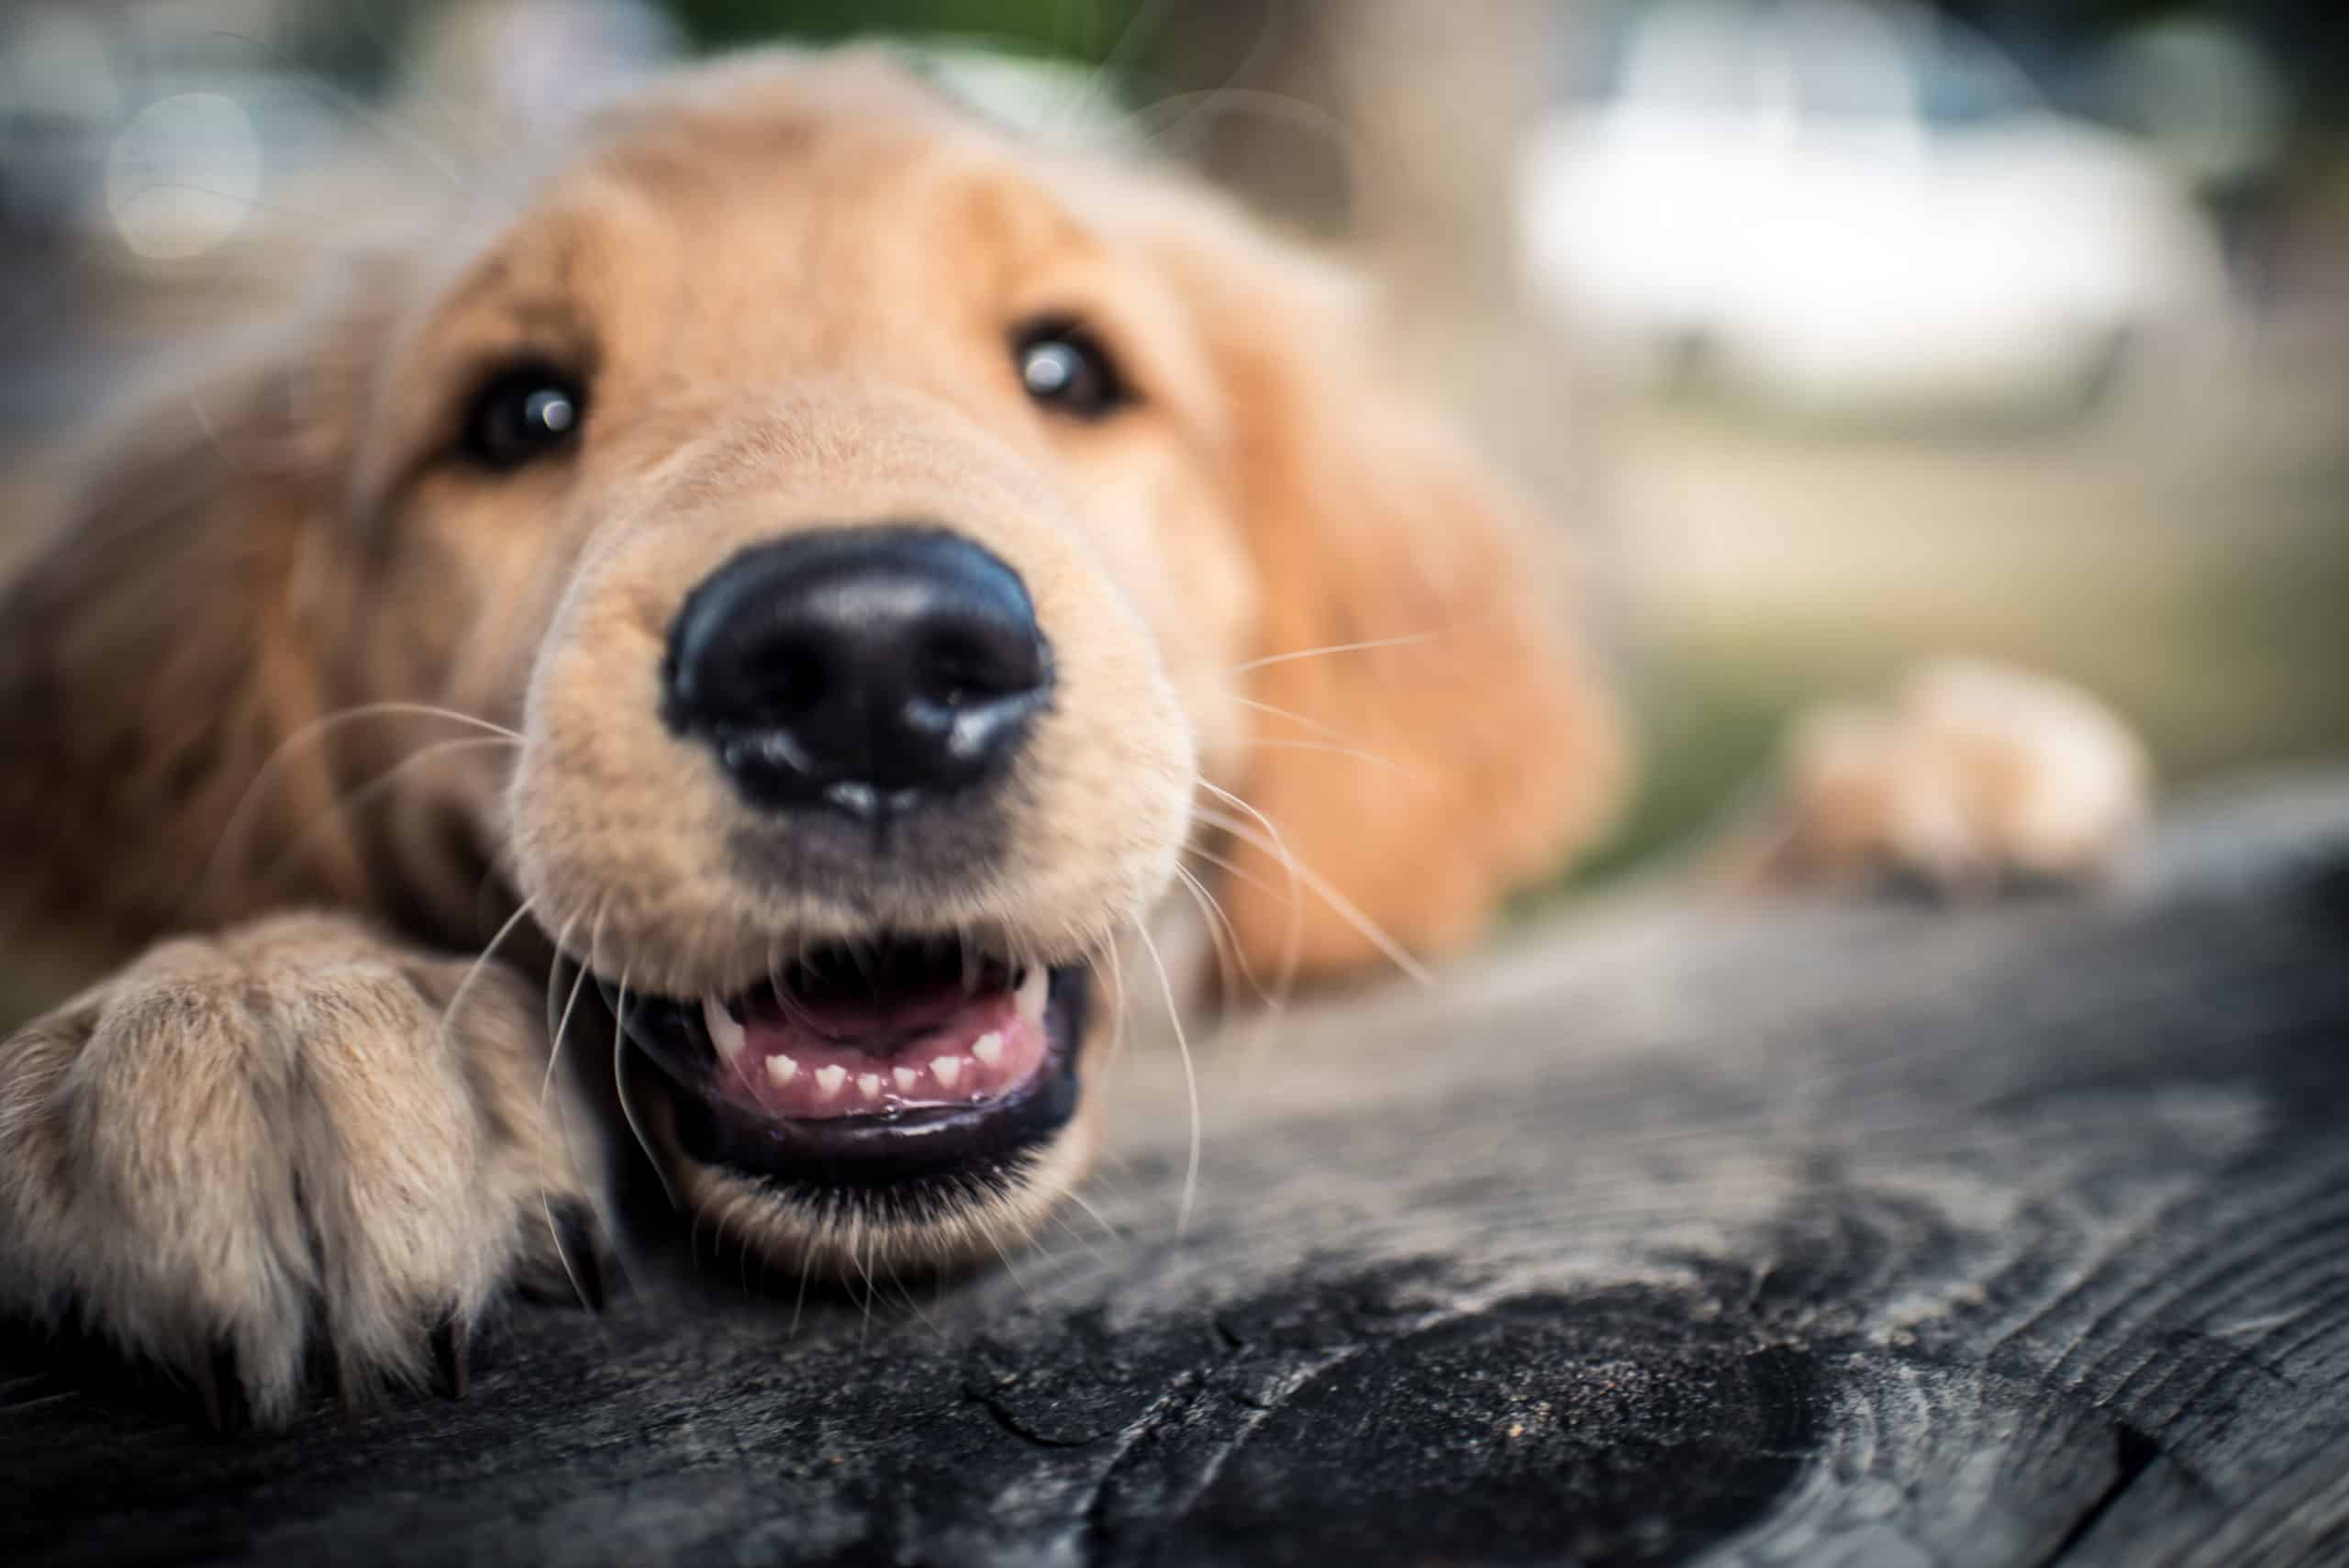 Should I pull my dog’s loose tooth?